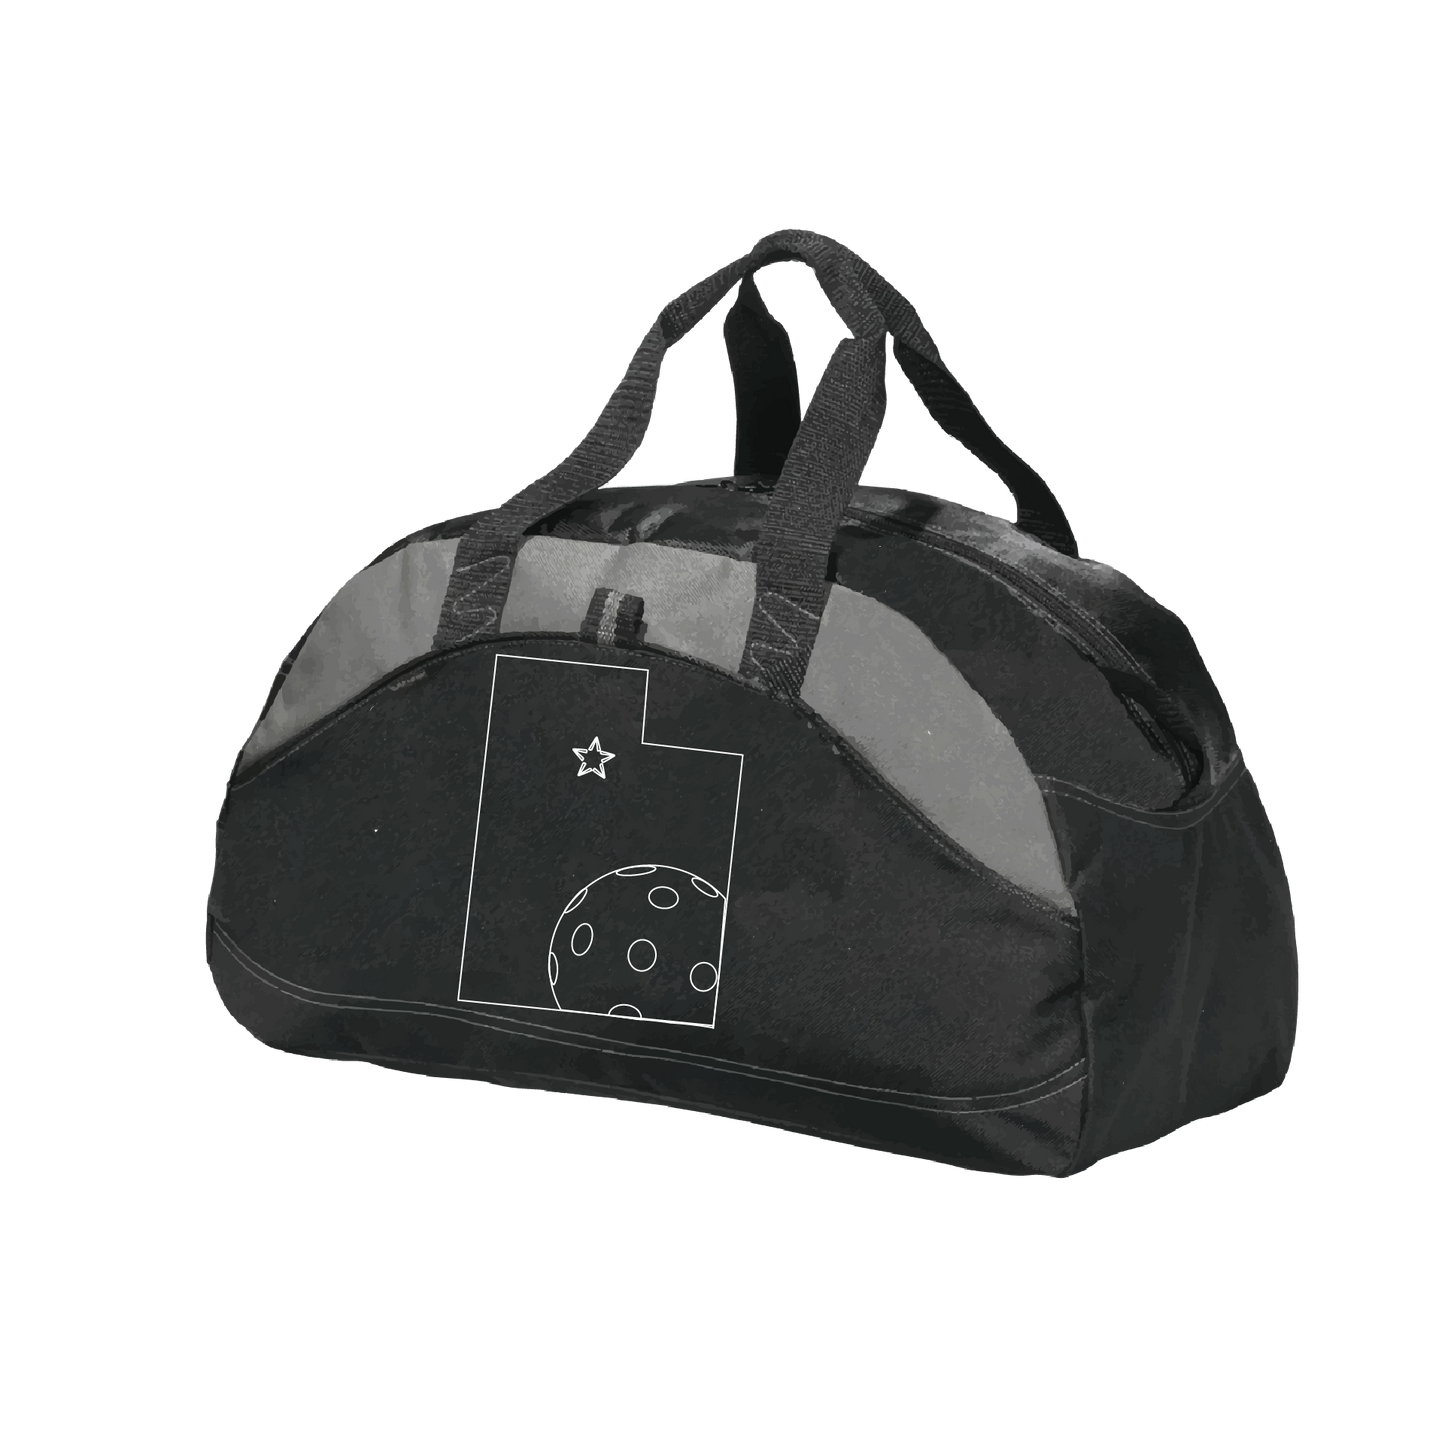 Pickleball Duffel Bag Design: Utah with Ball  Carry your gear in comfort and style. This fun pickleball duffel bag is the perfect accessory for all pickleball players needing to keep their gear in one place. This medium sized duffel tote is ideal for all your pickleball activities. The large center compartment allows for plenty of space and the mesh end pocket is perfect for holding a water bottle.